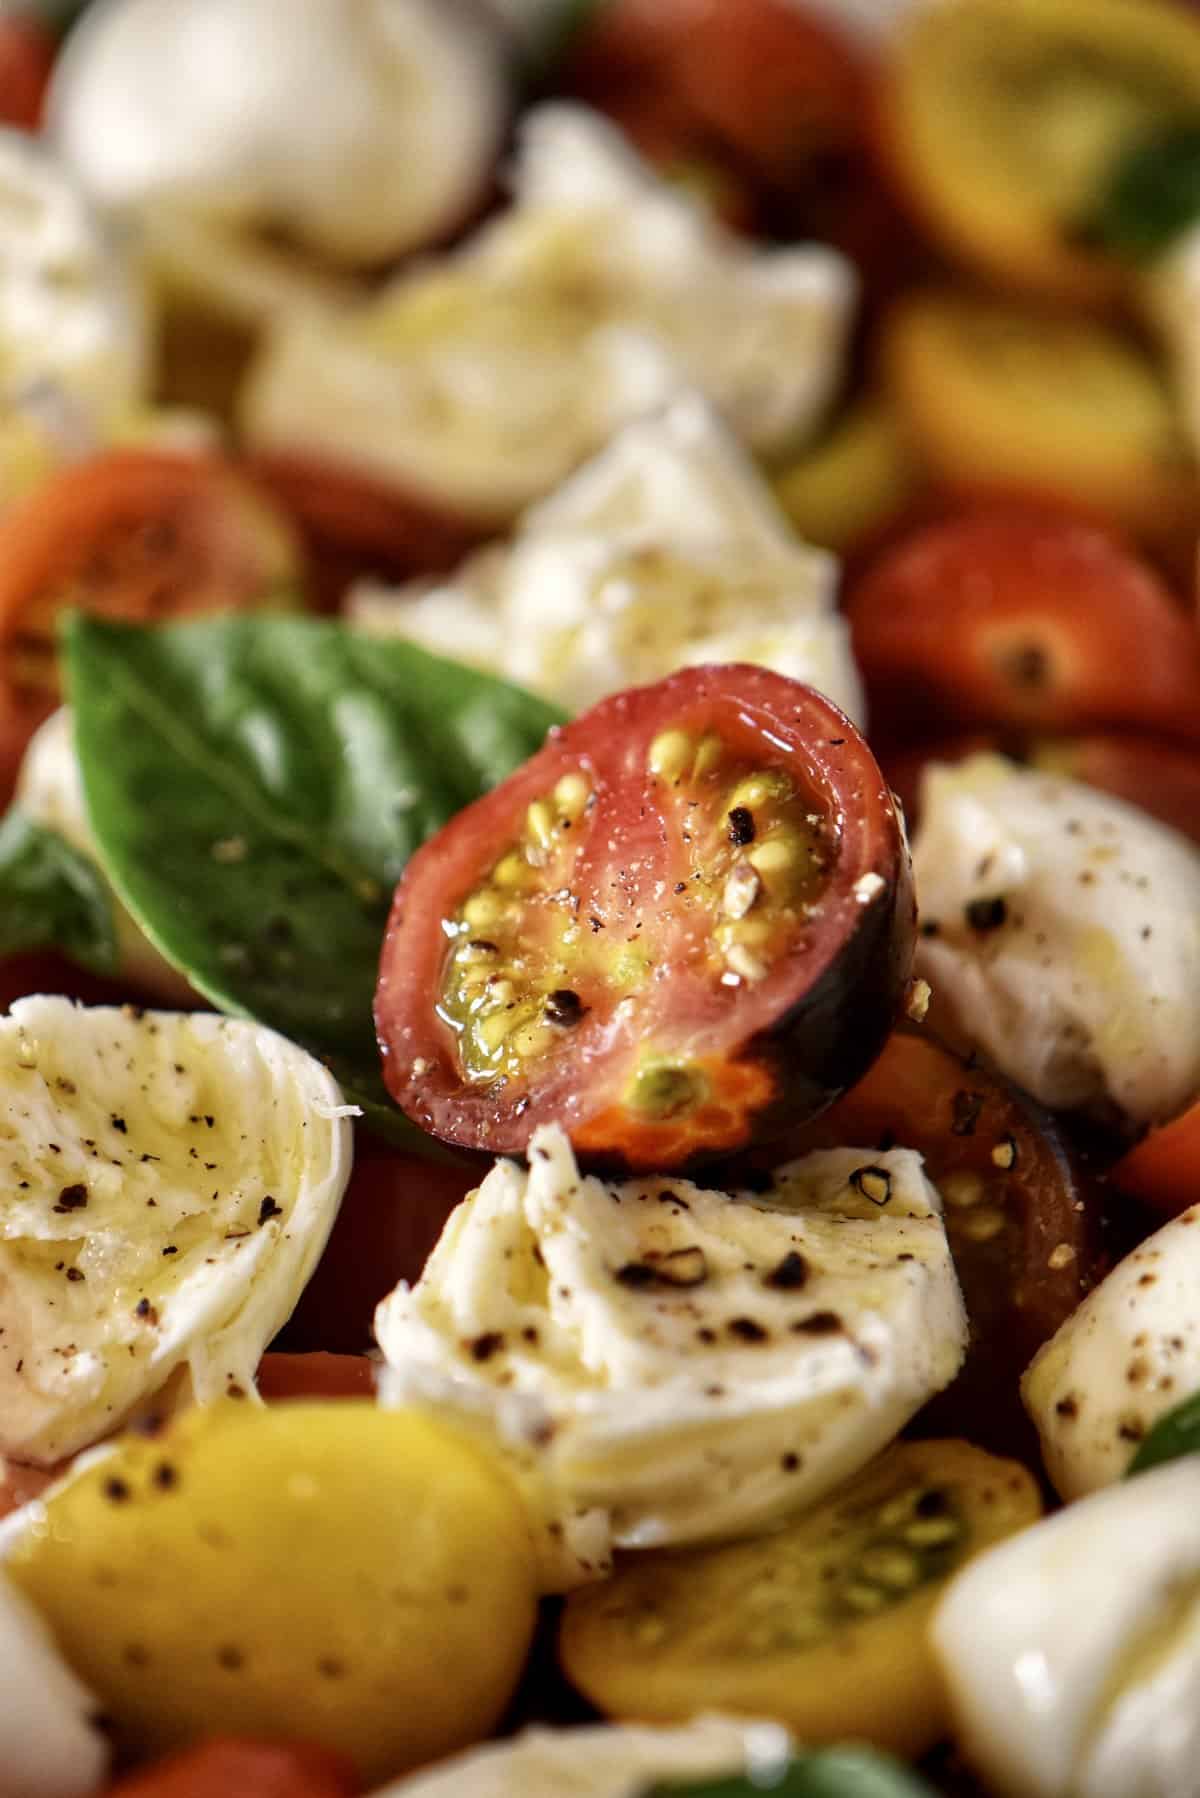 A close up photo of a caprese salad with cherry tomatoes.